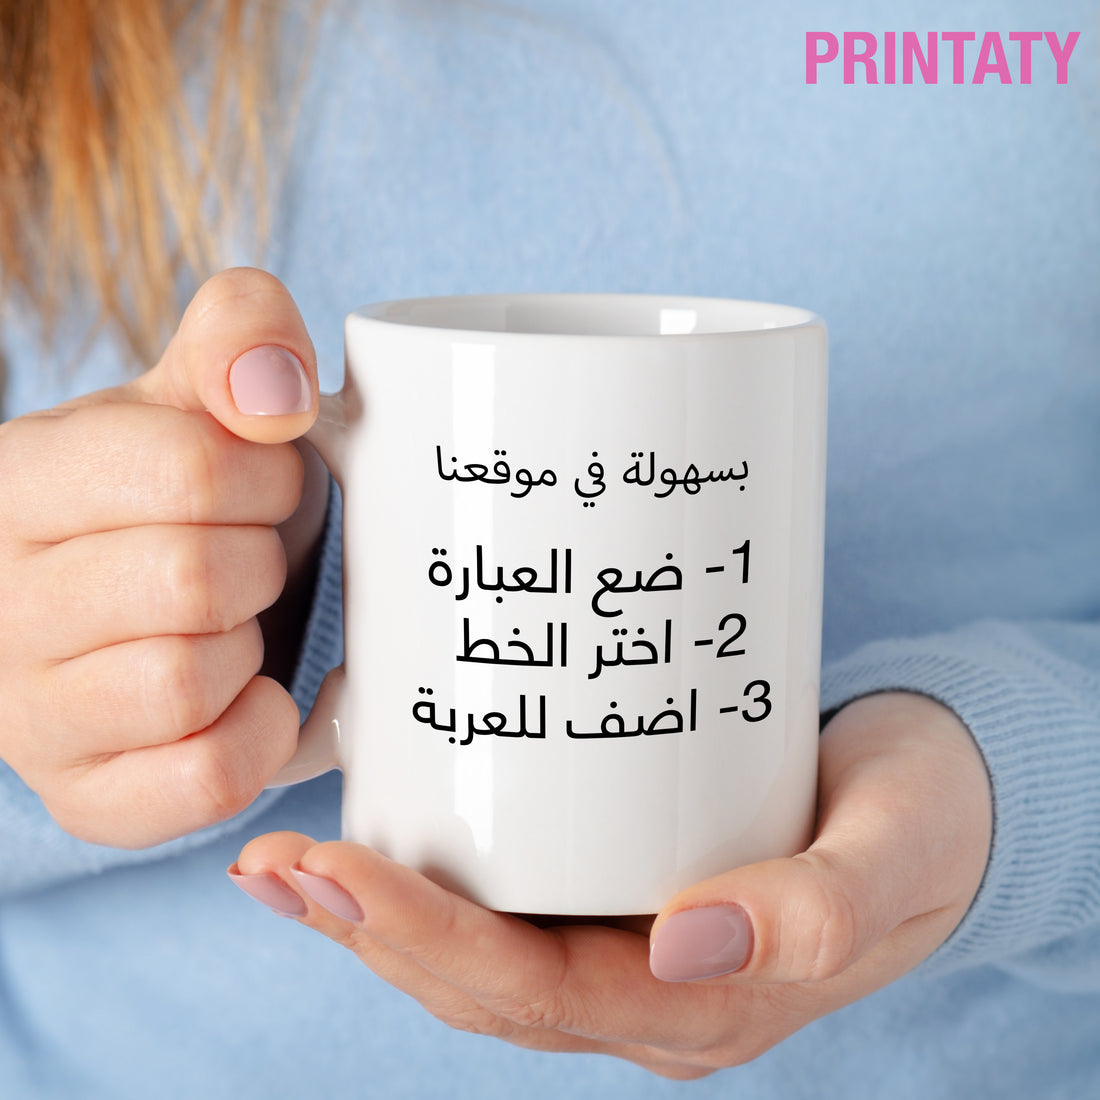 Mug with your own words printed